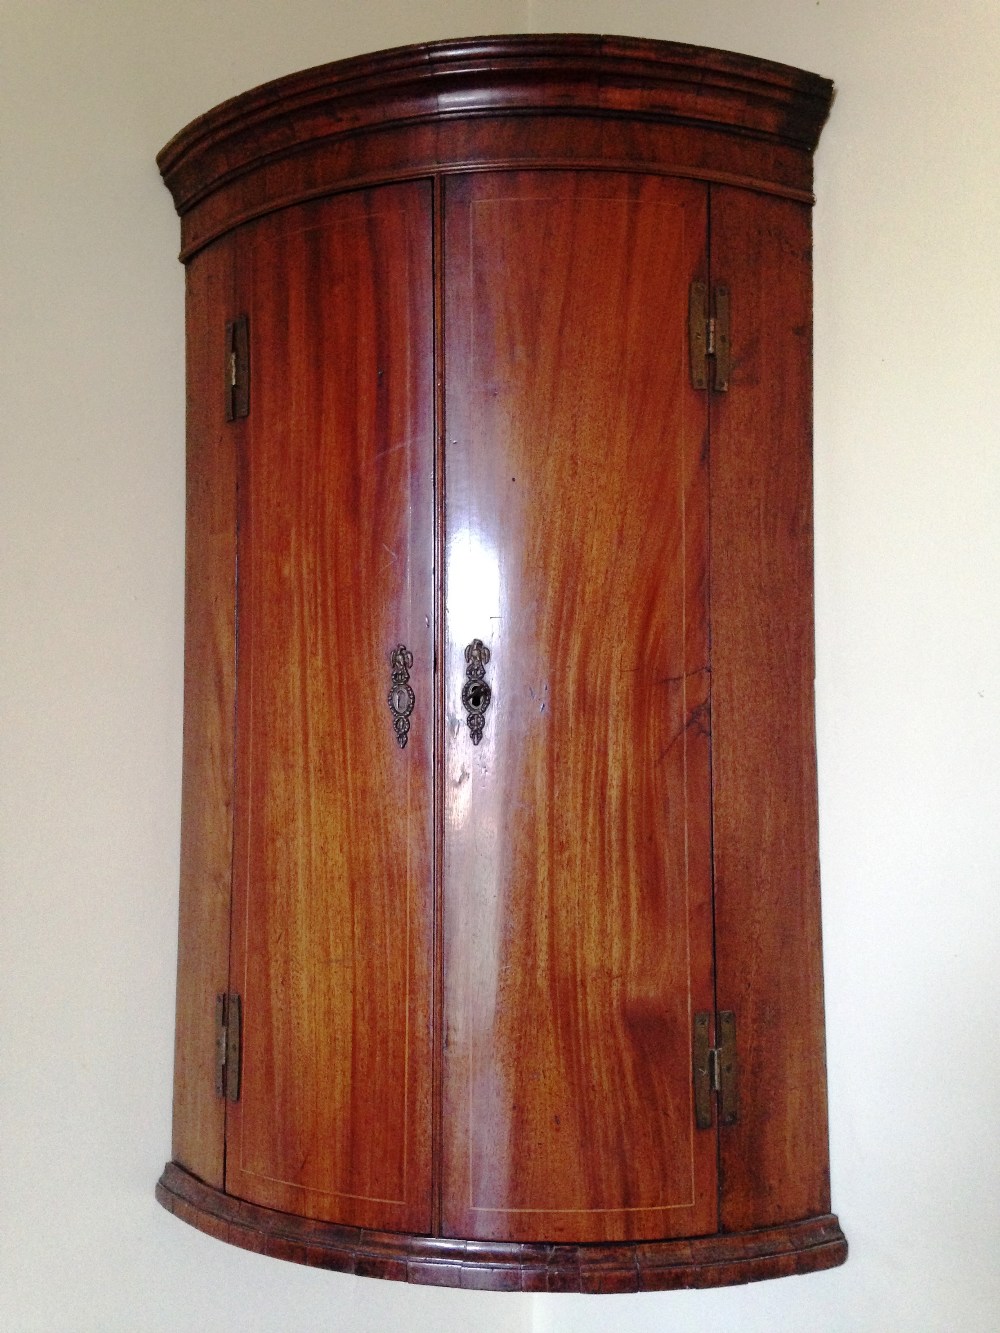 A Sheraton mahogany bow fronted hanging corner cupboard, the cavetto cornice above an interior